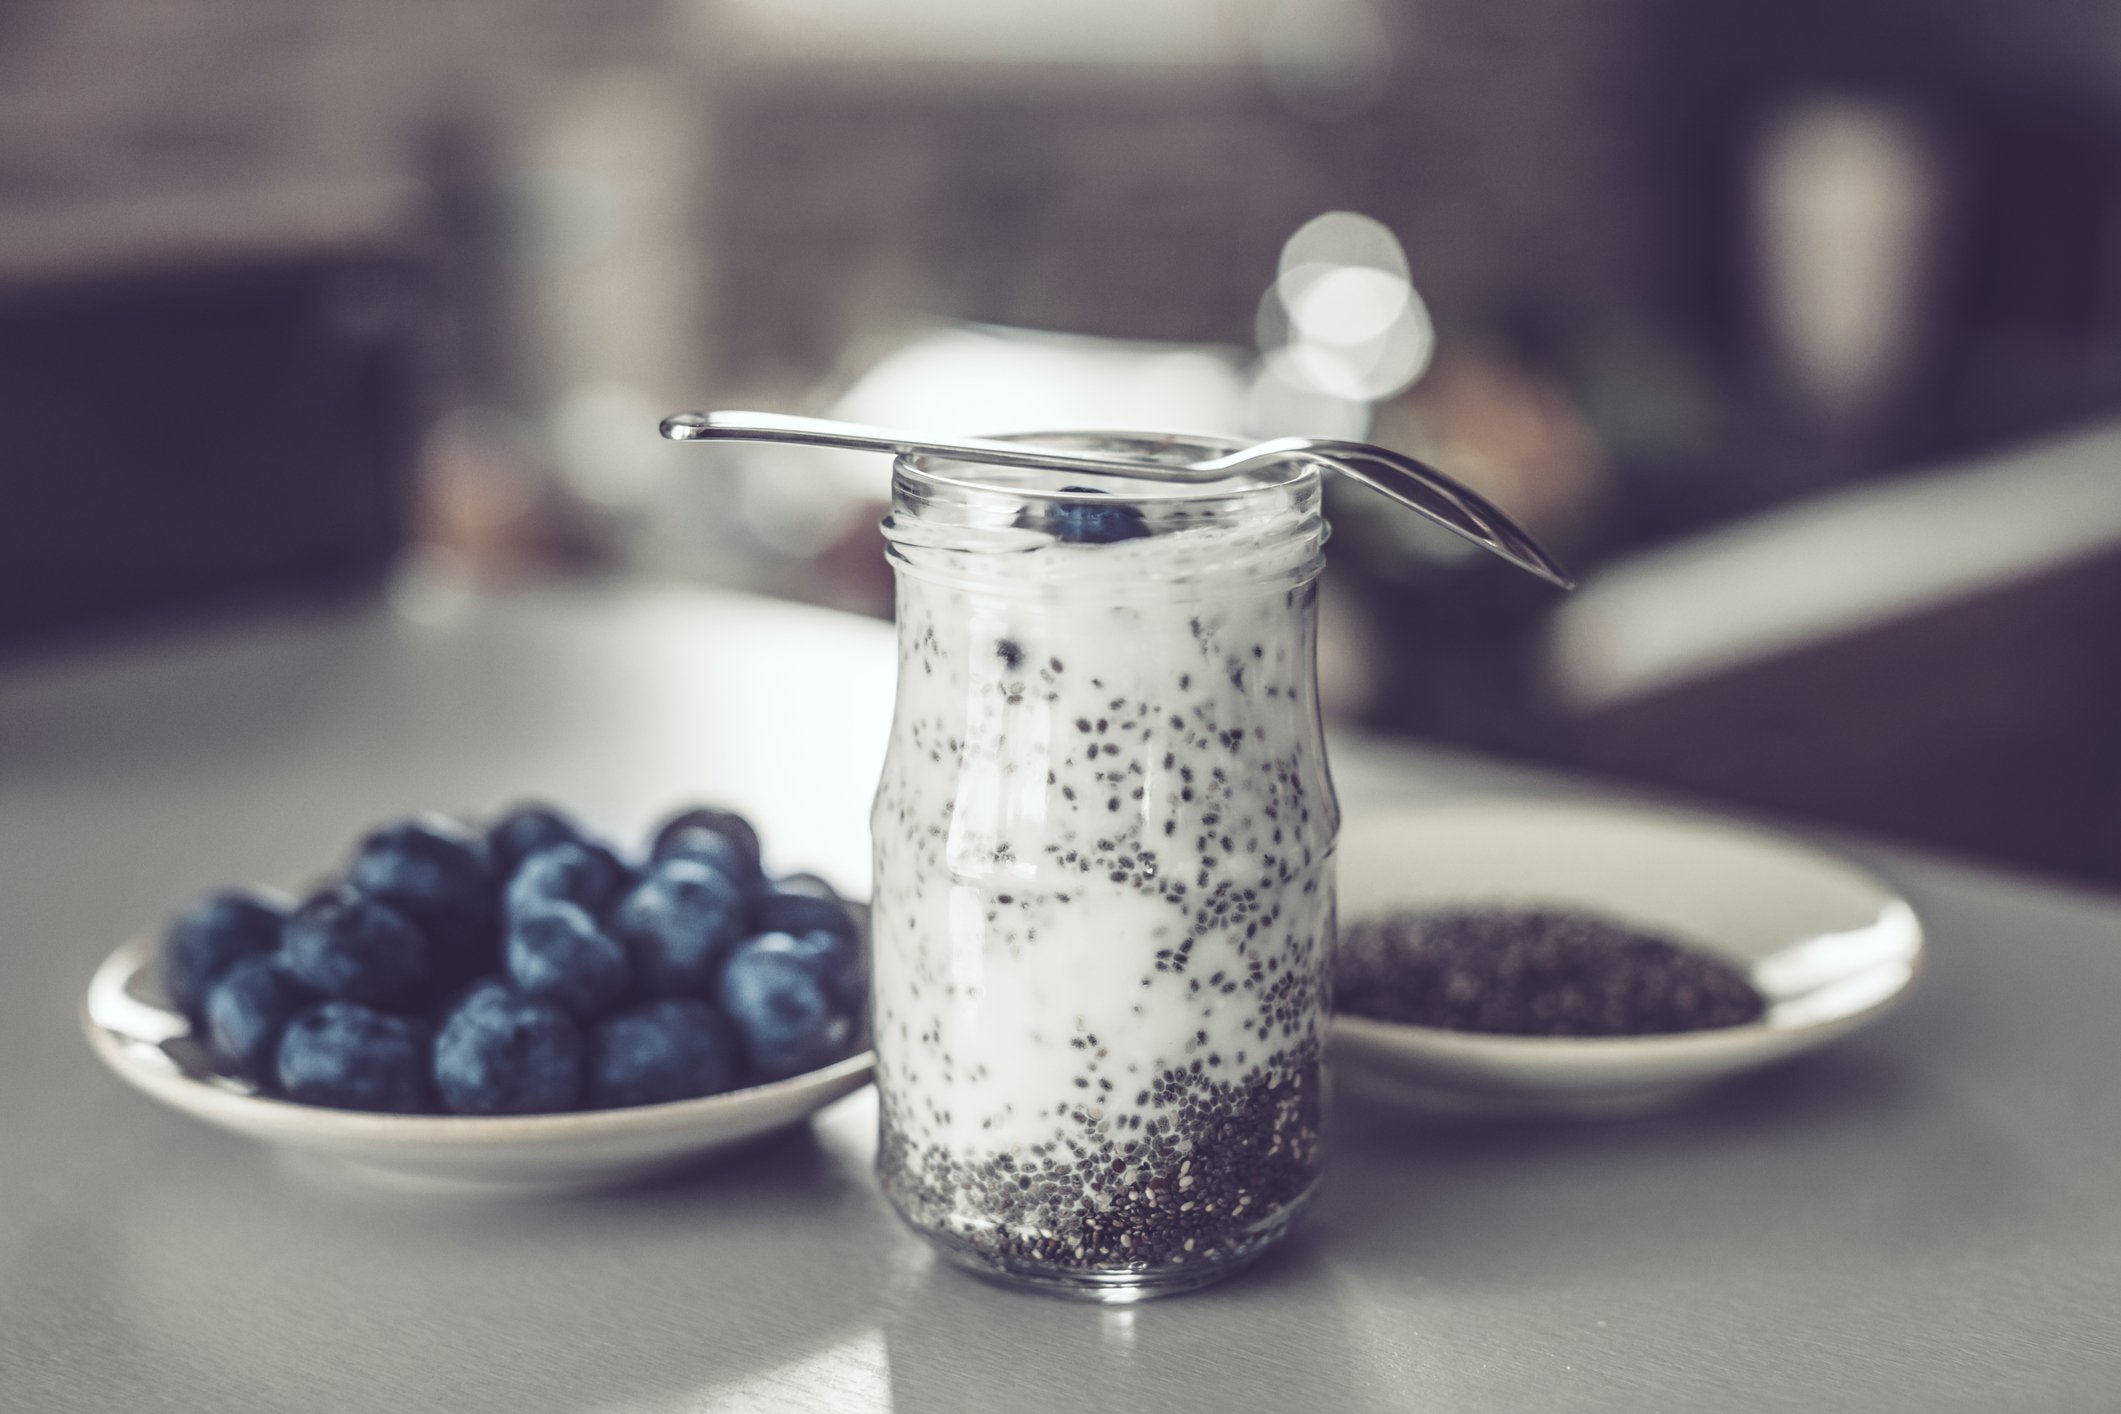 Blueberrry Chia Seed Pudding